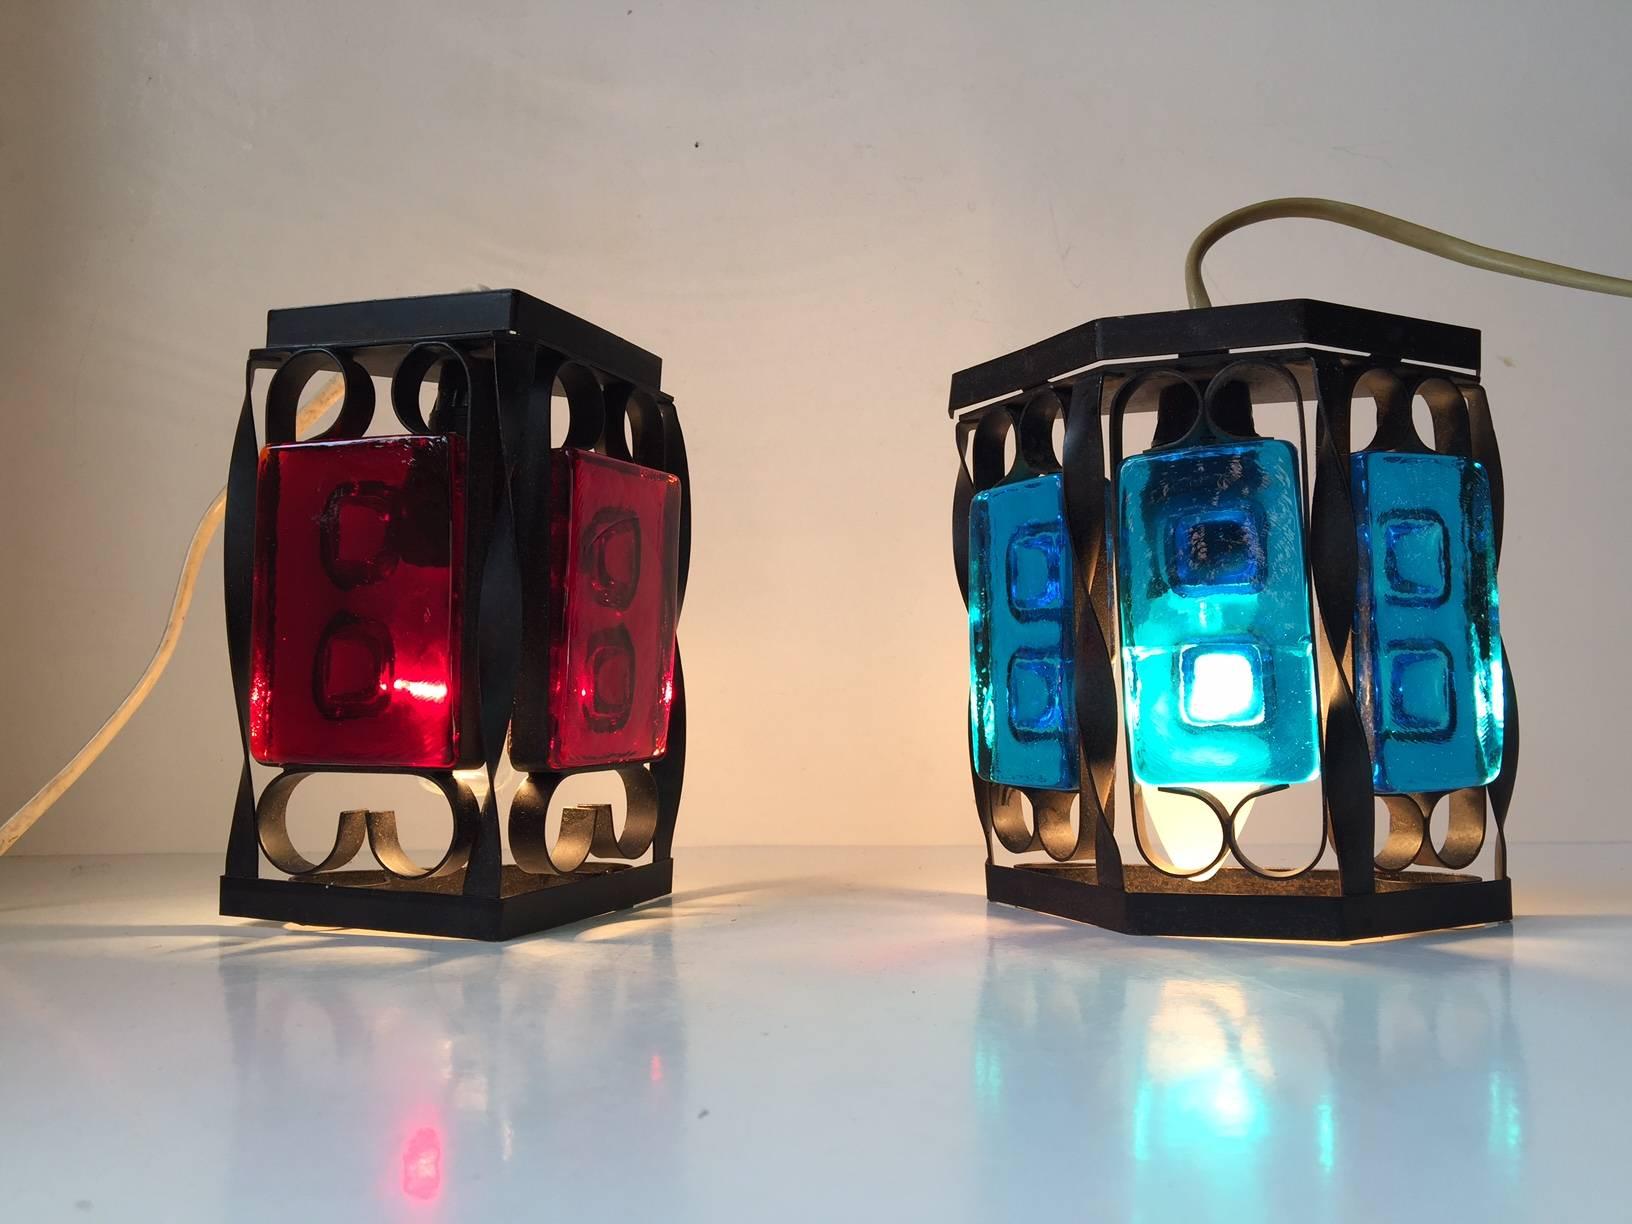 A set of Danish black iron and colored glass sconces. Manufactured and designed in the 1970s as a collaboration between Dantofte and Holmegaard. Measurements: H 16/14 cm (6.2/5.8 inch), W 12/13 (4.8/5.2 inch). Similar to designs by Claus Bolby and